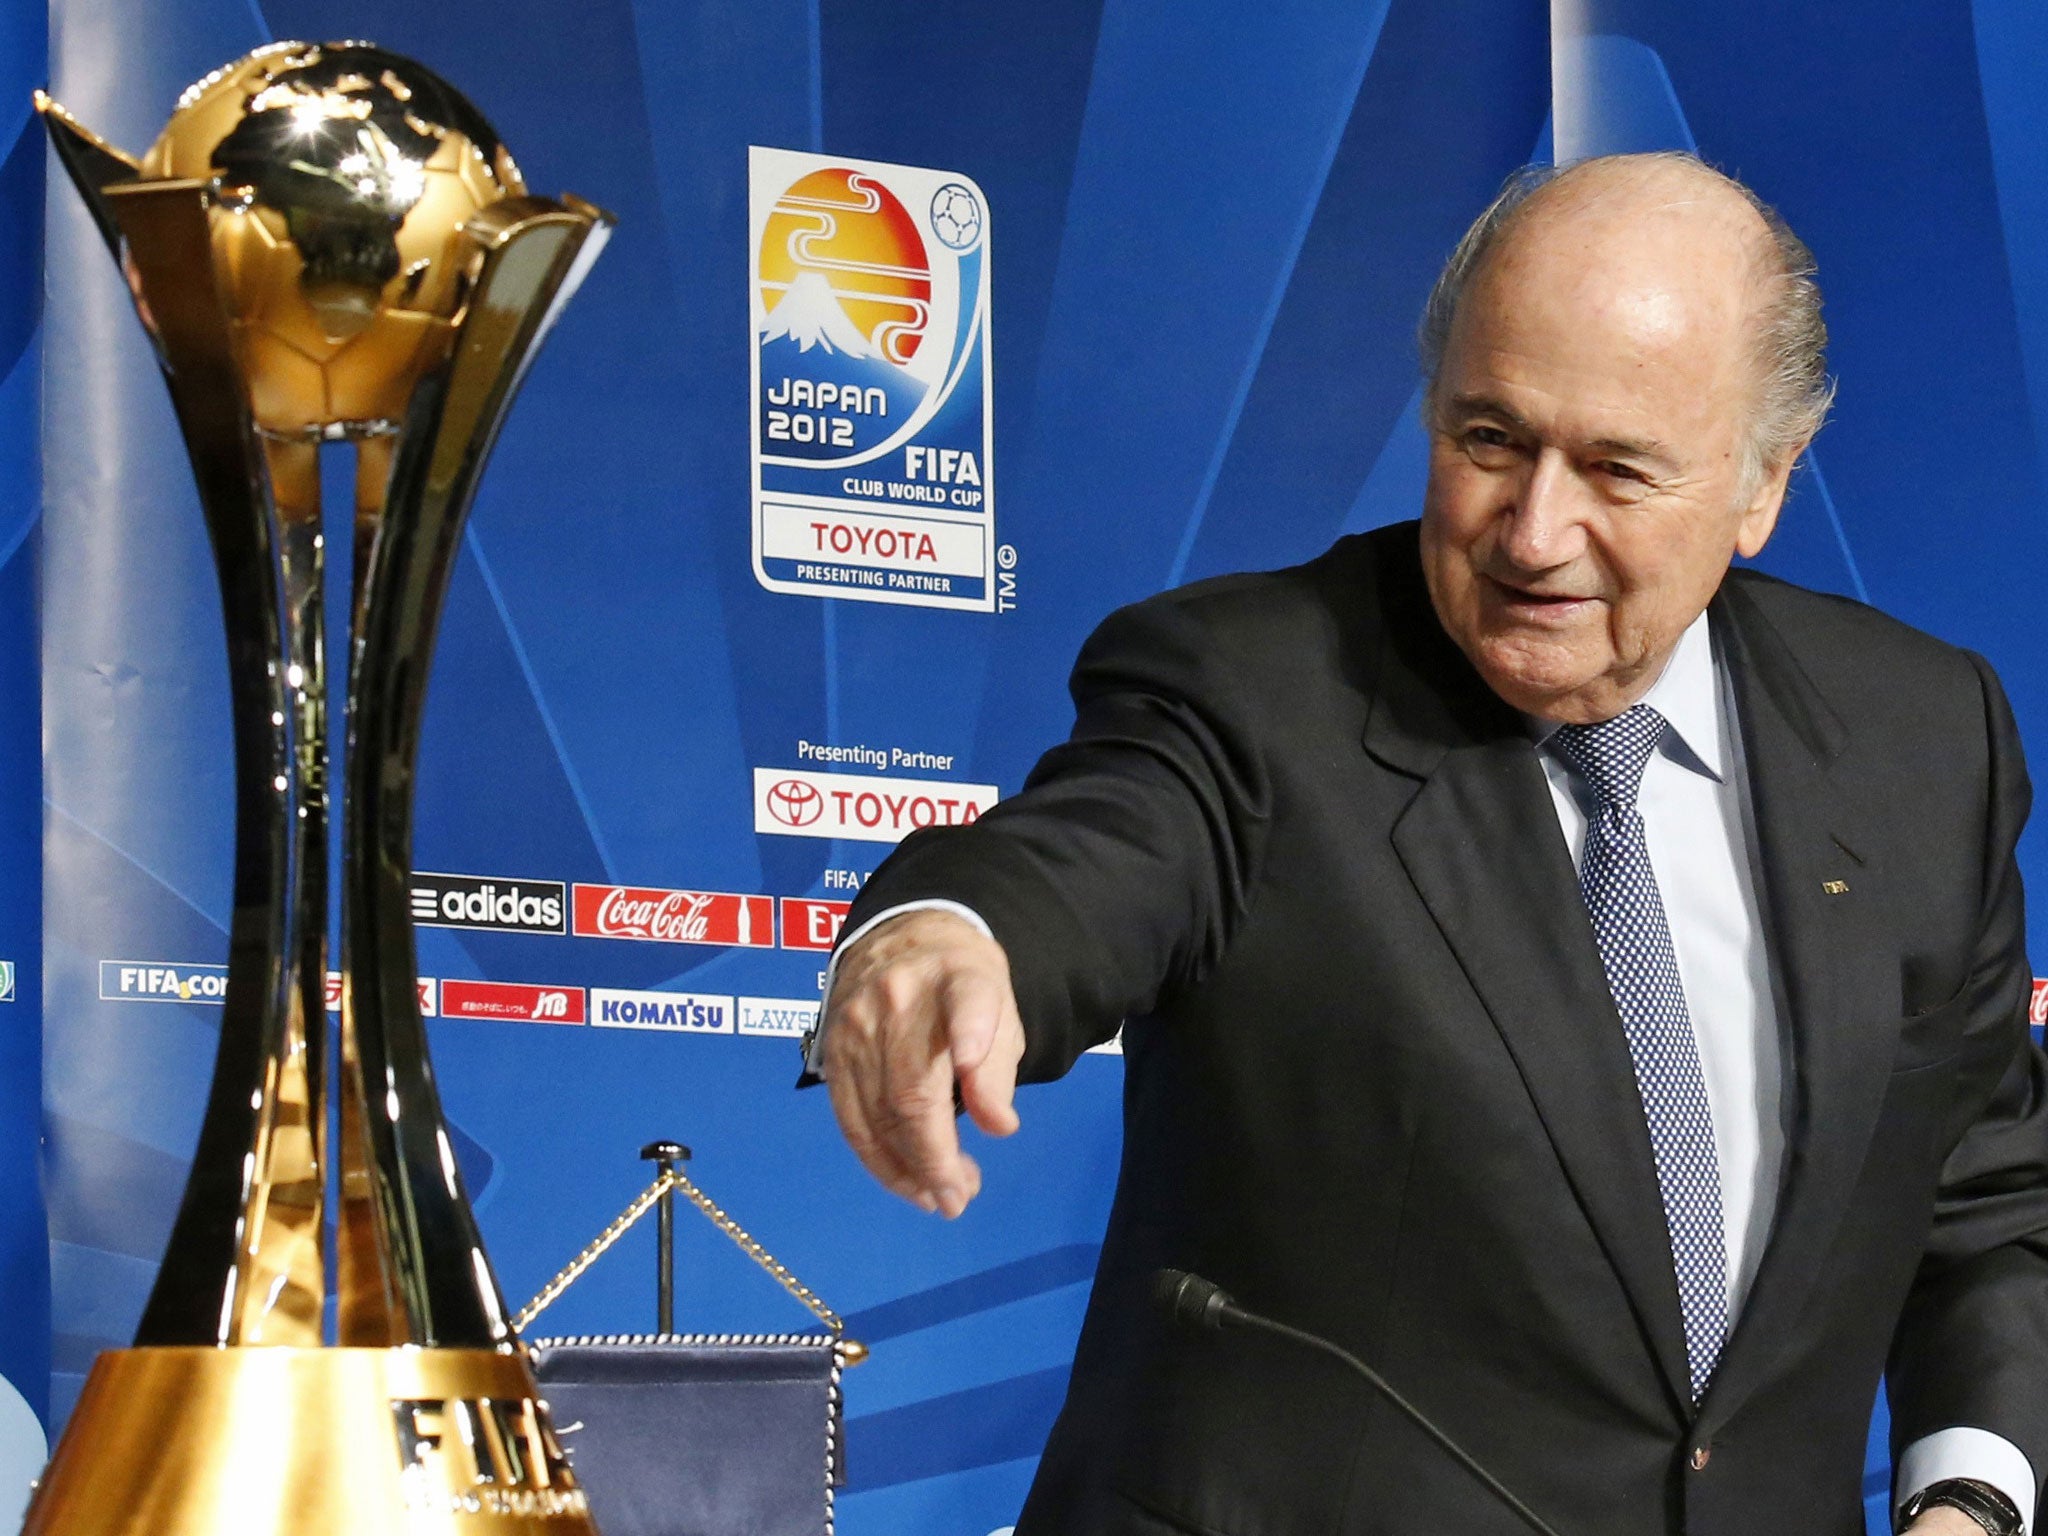 Sepp Blatter has called on his Uefa counterpart, Michel Platini, to consider imposing tougher sanctions on the Serbian FA for racist chanting and violence